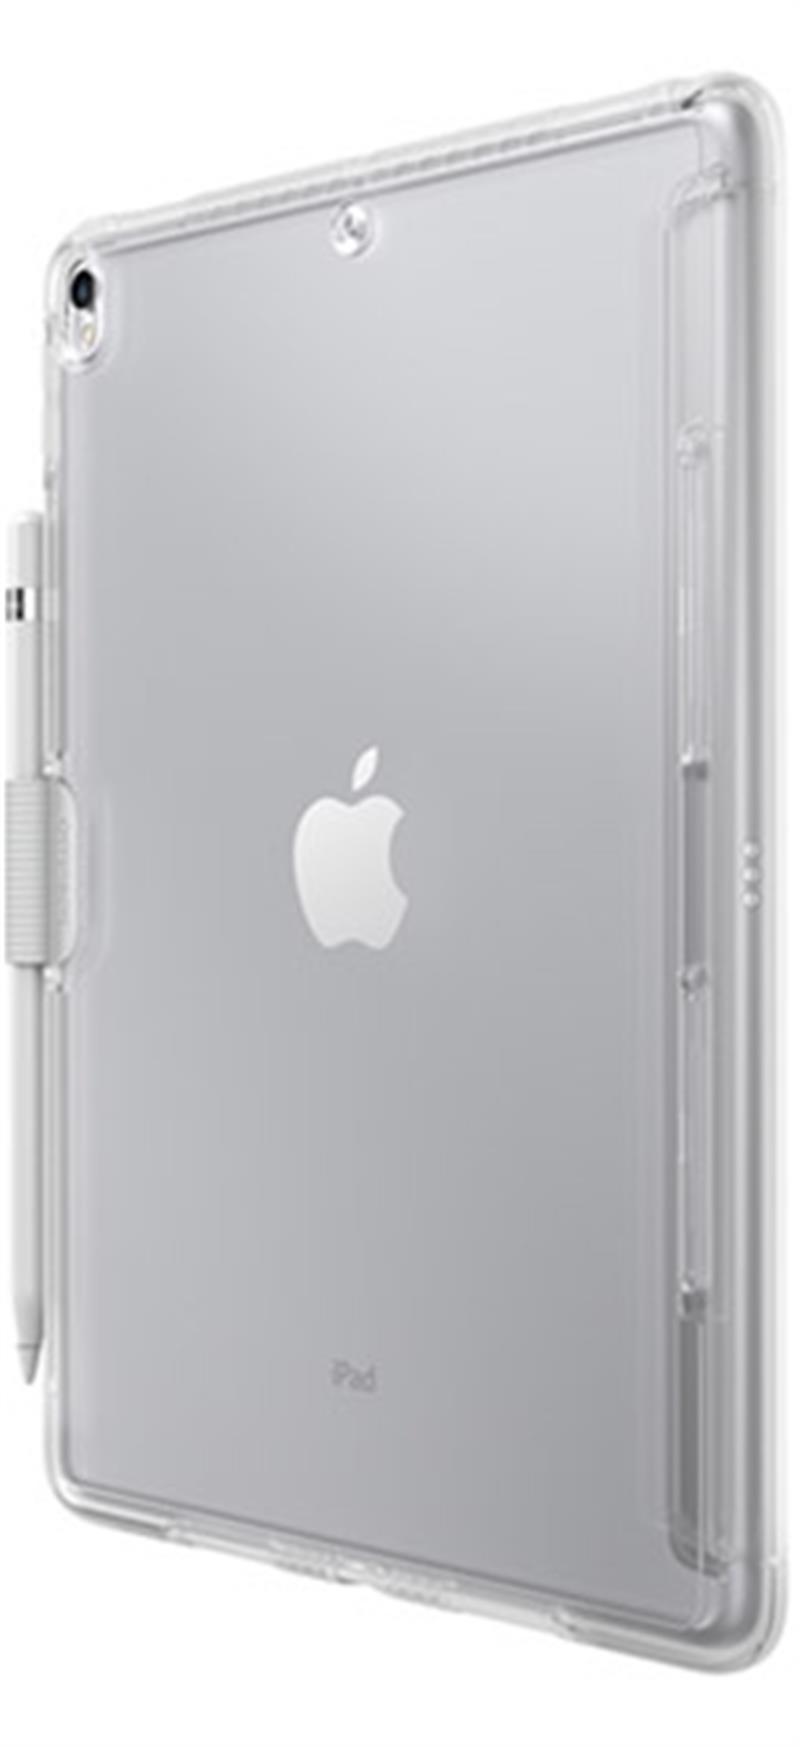 Tablet Case - Symmetry Clear - Ipad Air Ipad Pro - 10 5 inch